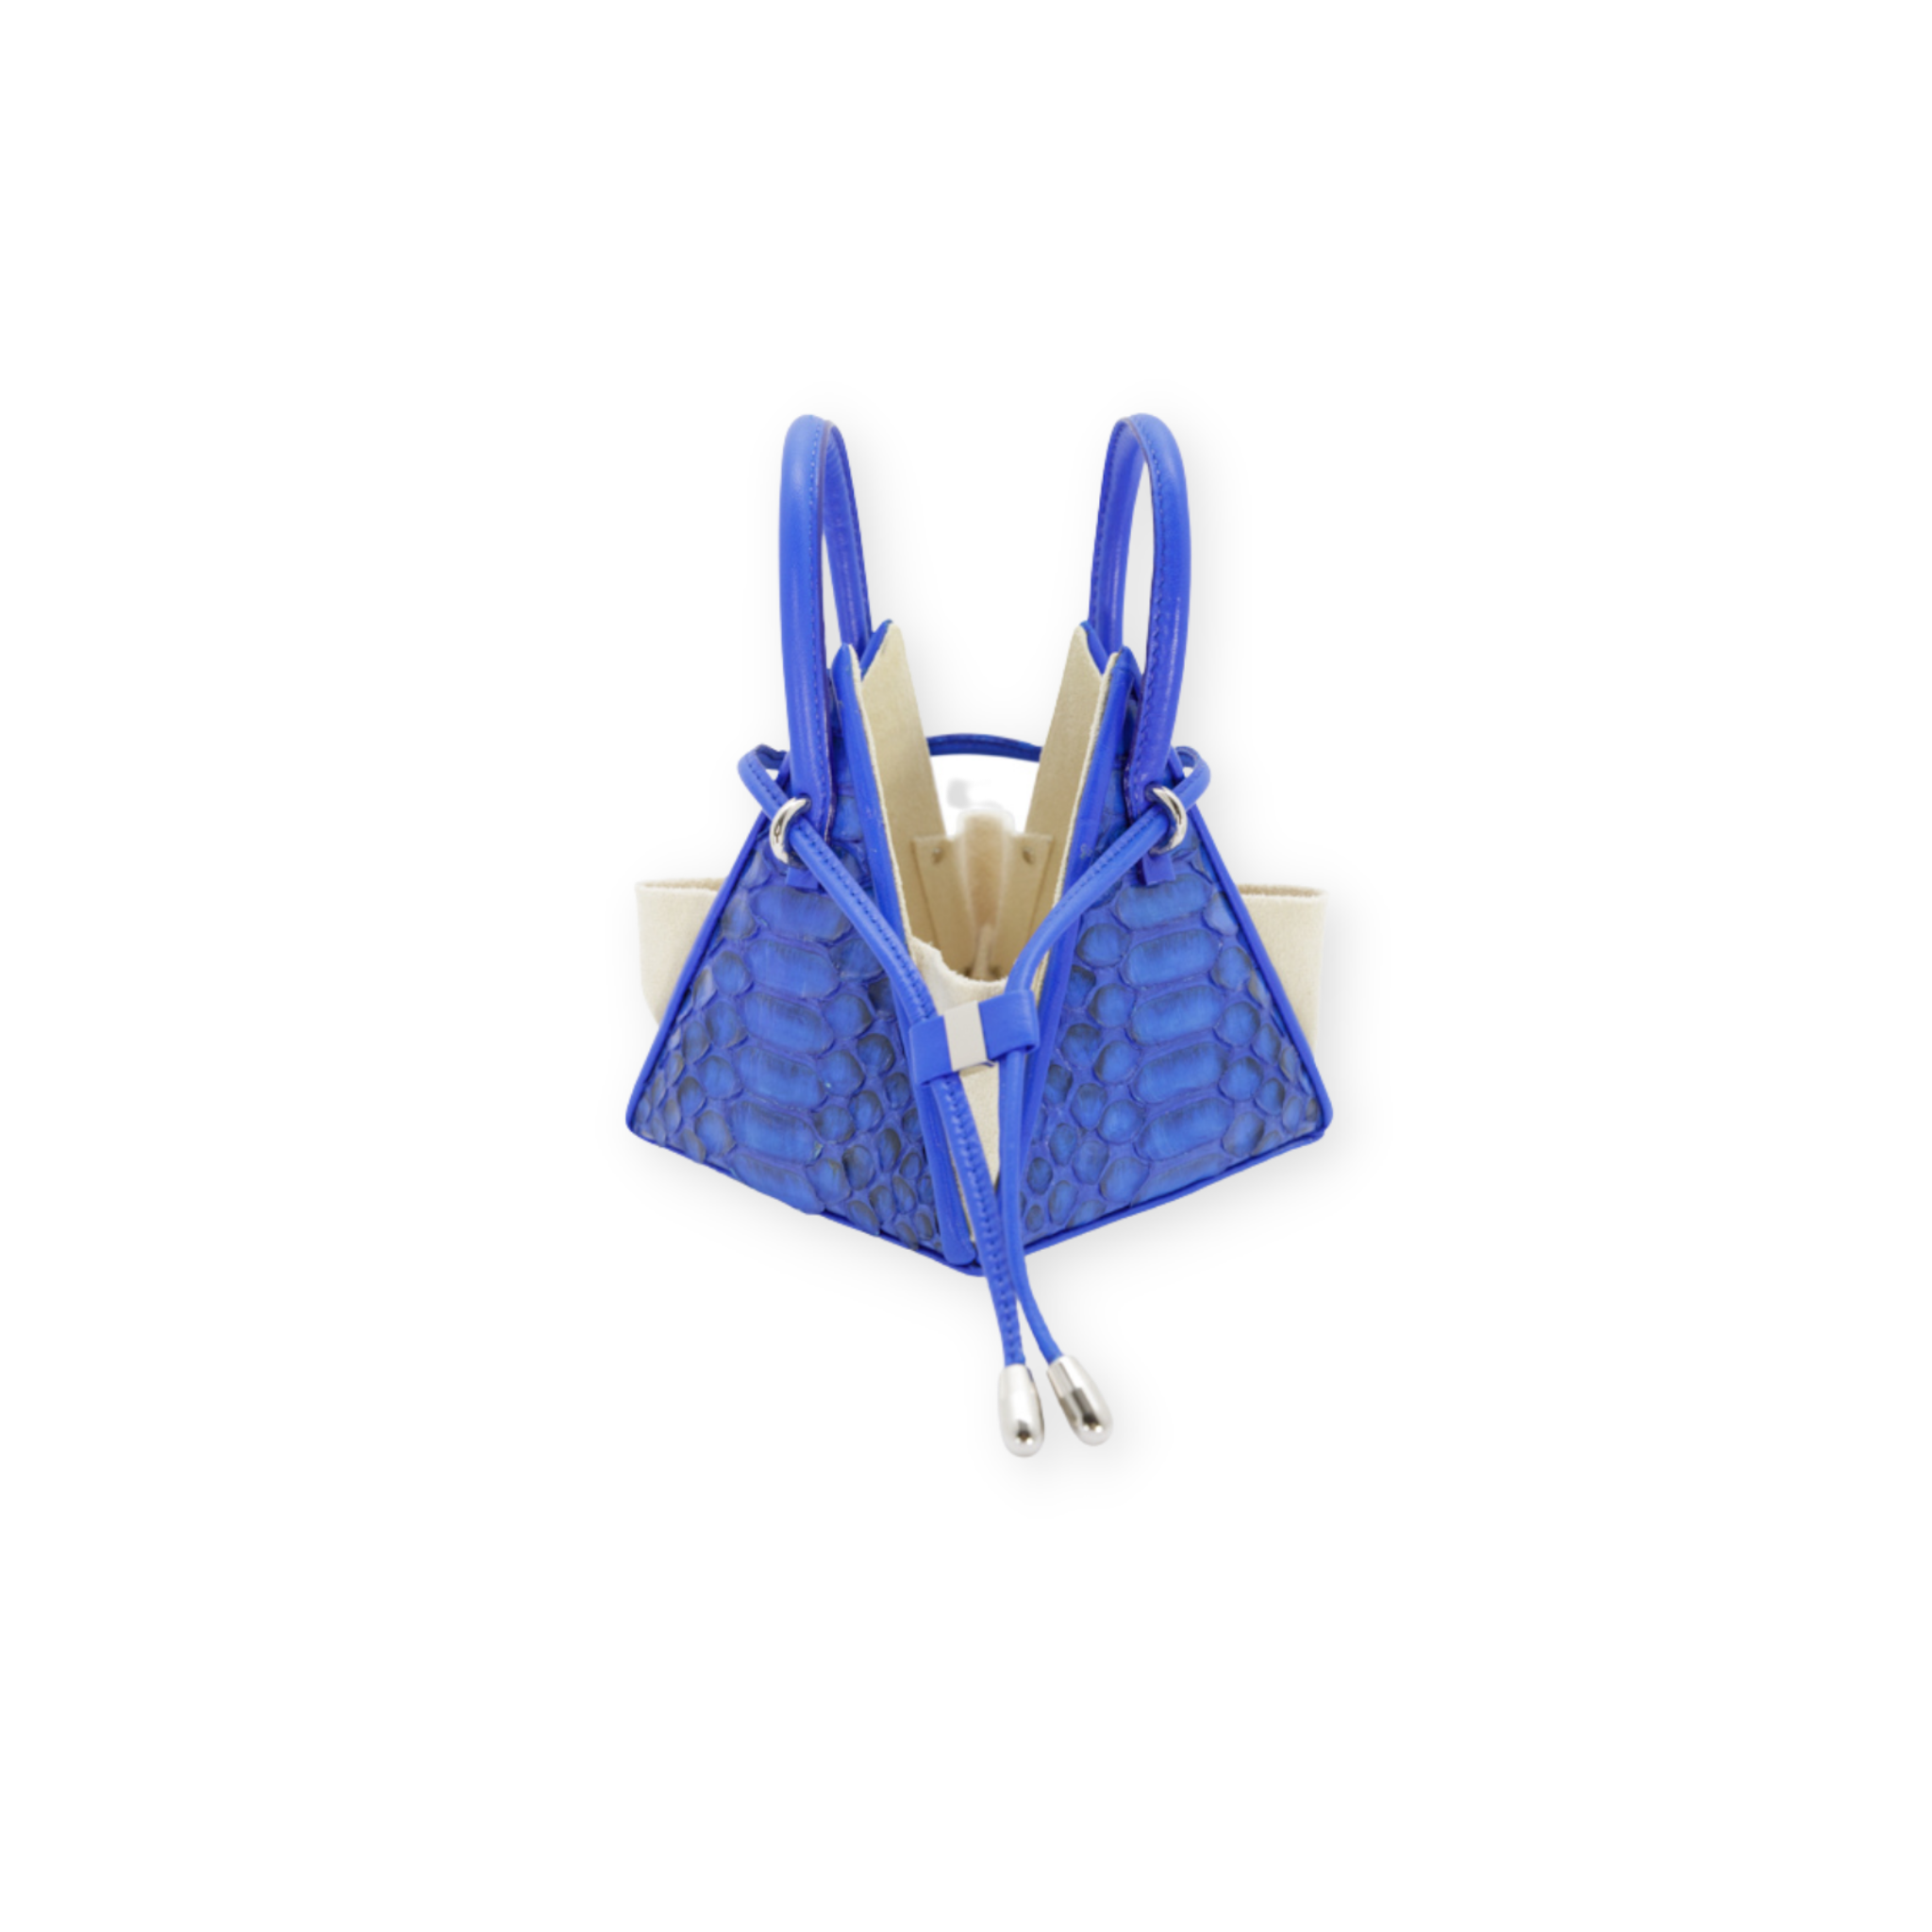 Buy now the Exotic LIA Mini bag inspired by the geometric shapes of our designer's birth city Barcelona, and its world known artist, Antonio Gaudí, architect of the world wonder La Sagrada Familia. The Exotic Lia Electric Blue Mini bag has a unique and functional pyramidal design able to fit all your essentials. 